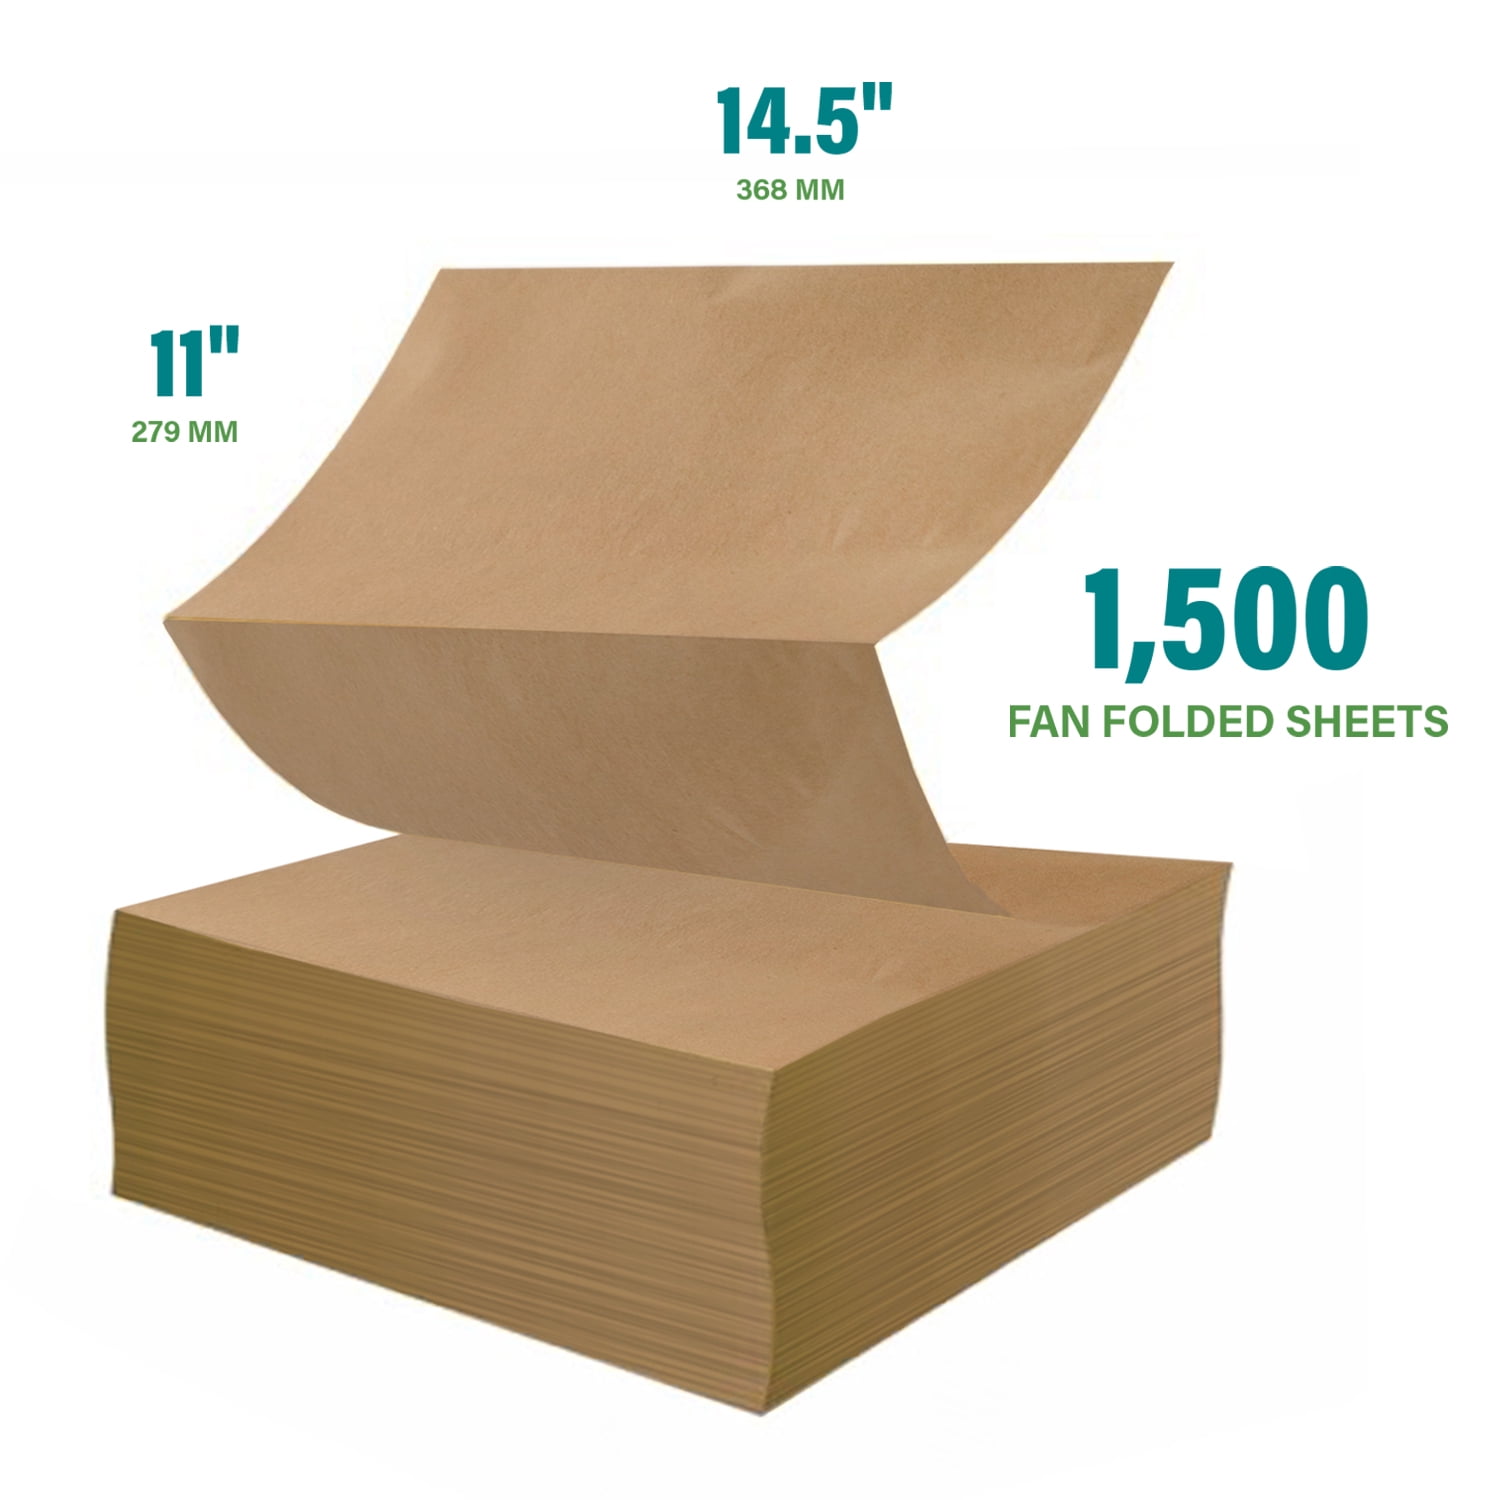 IDL Packaging 18 x 1200 Natural Kraft Paper Jumbo Roll for Wrapping Packaging and Void Filing 